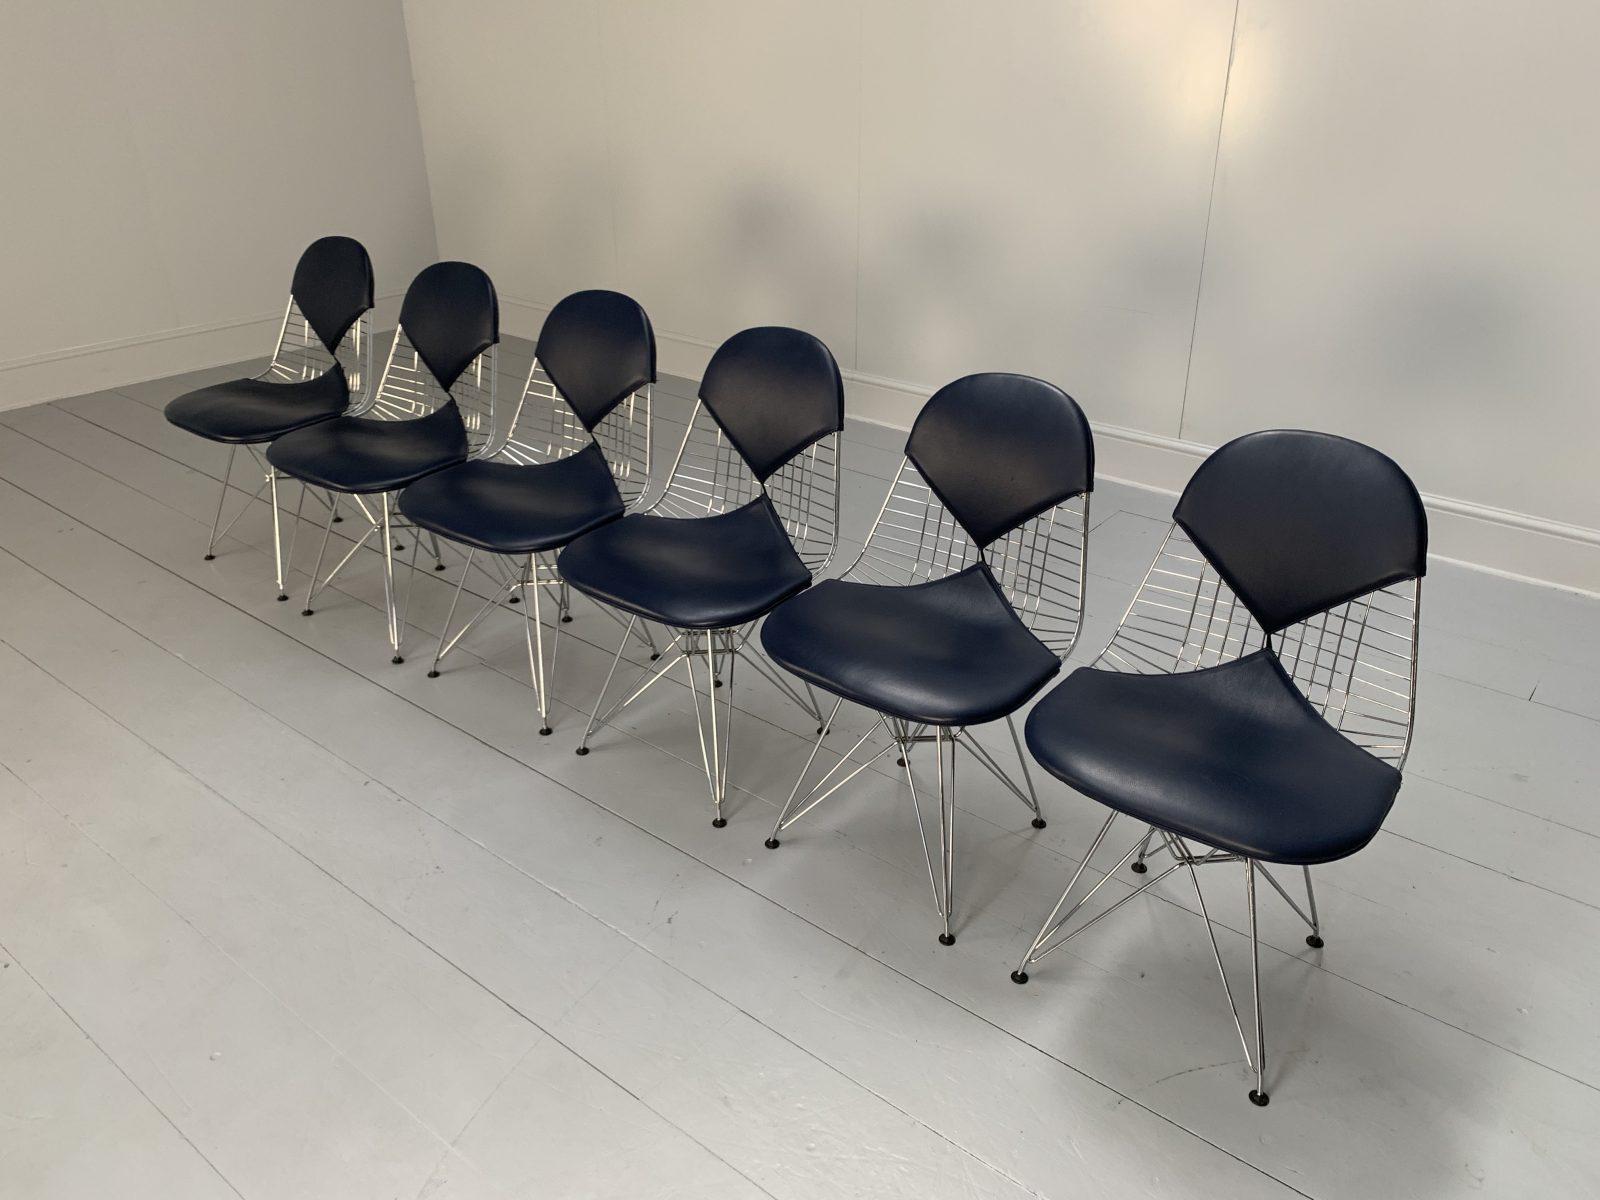 Suite of 6 Vitra “Eames DKR-2 Bikini” Chairs in Navy Blue Premium Leather In Good Condition For Sale In Barrowford, GB